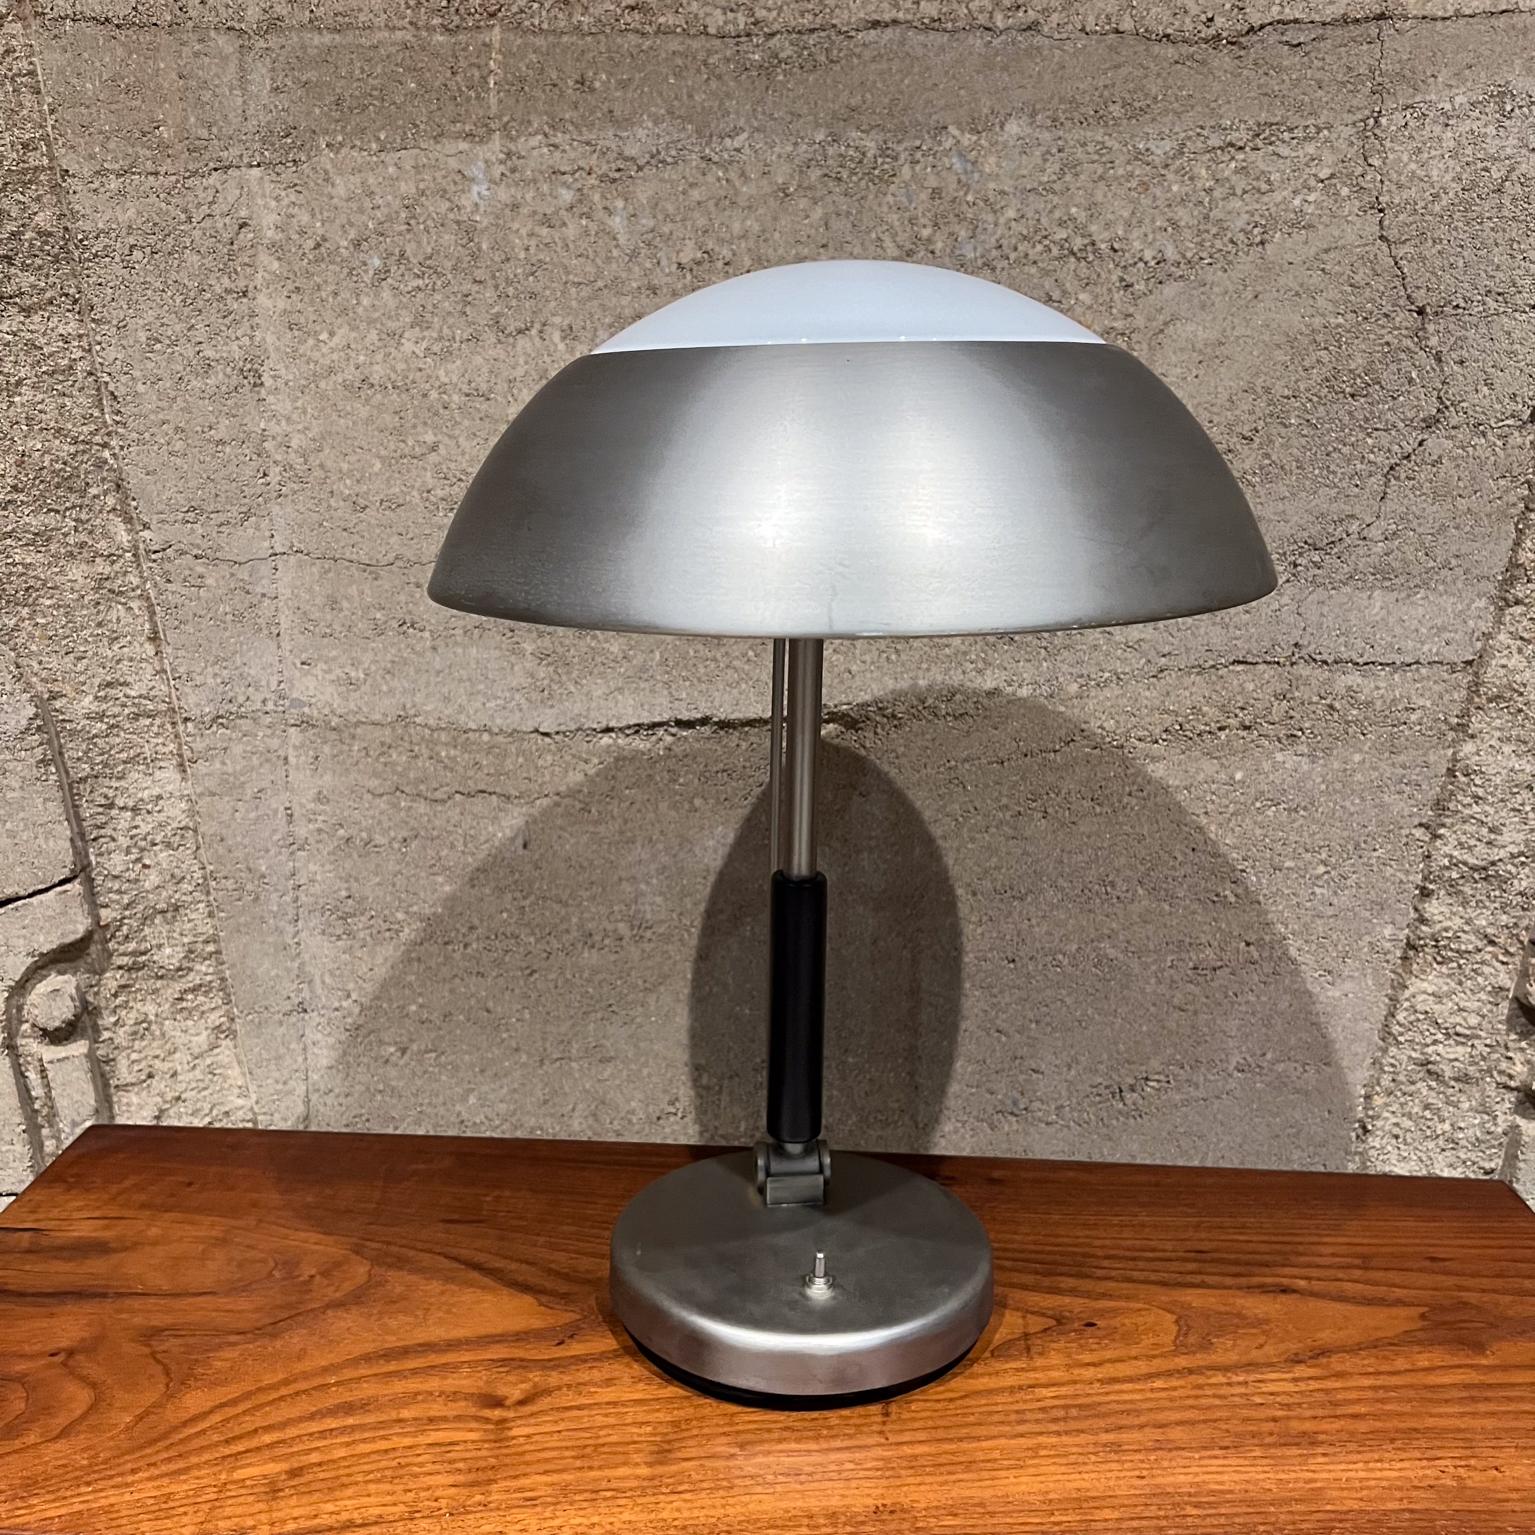 
German Desk Table Lamp Art Deco Bauhaus
Karl Trabert
18.5 h x 13 d x 13 d-Inclined 17.5 long
Preowned original vintage condition
Refer to images provided.